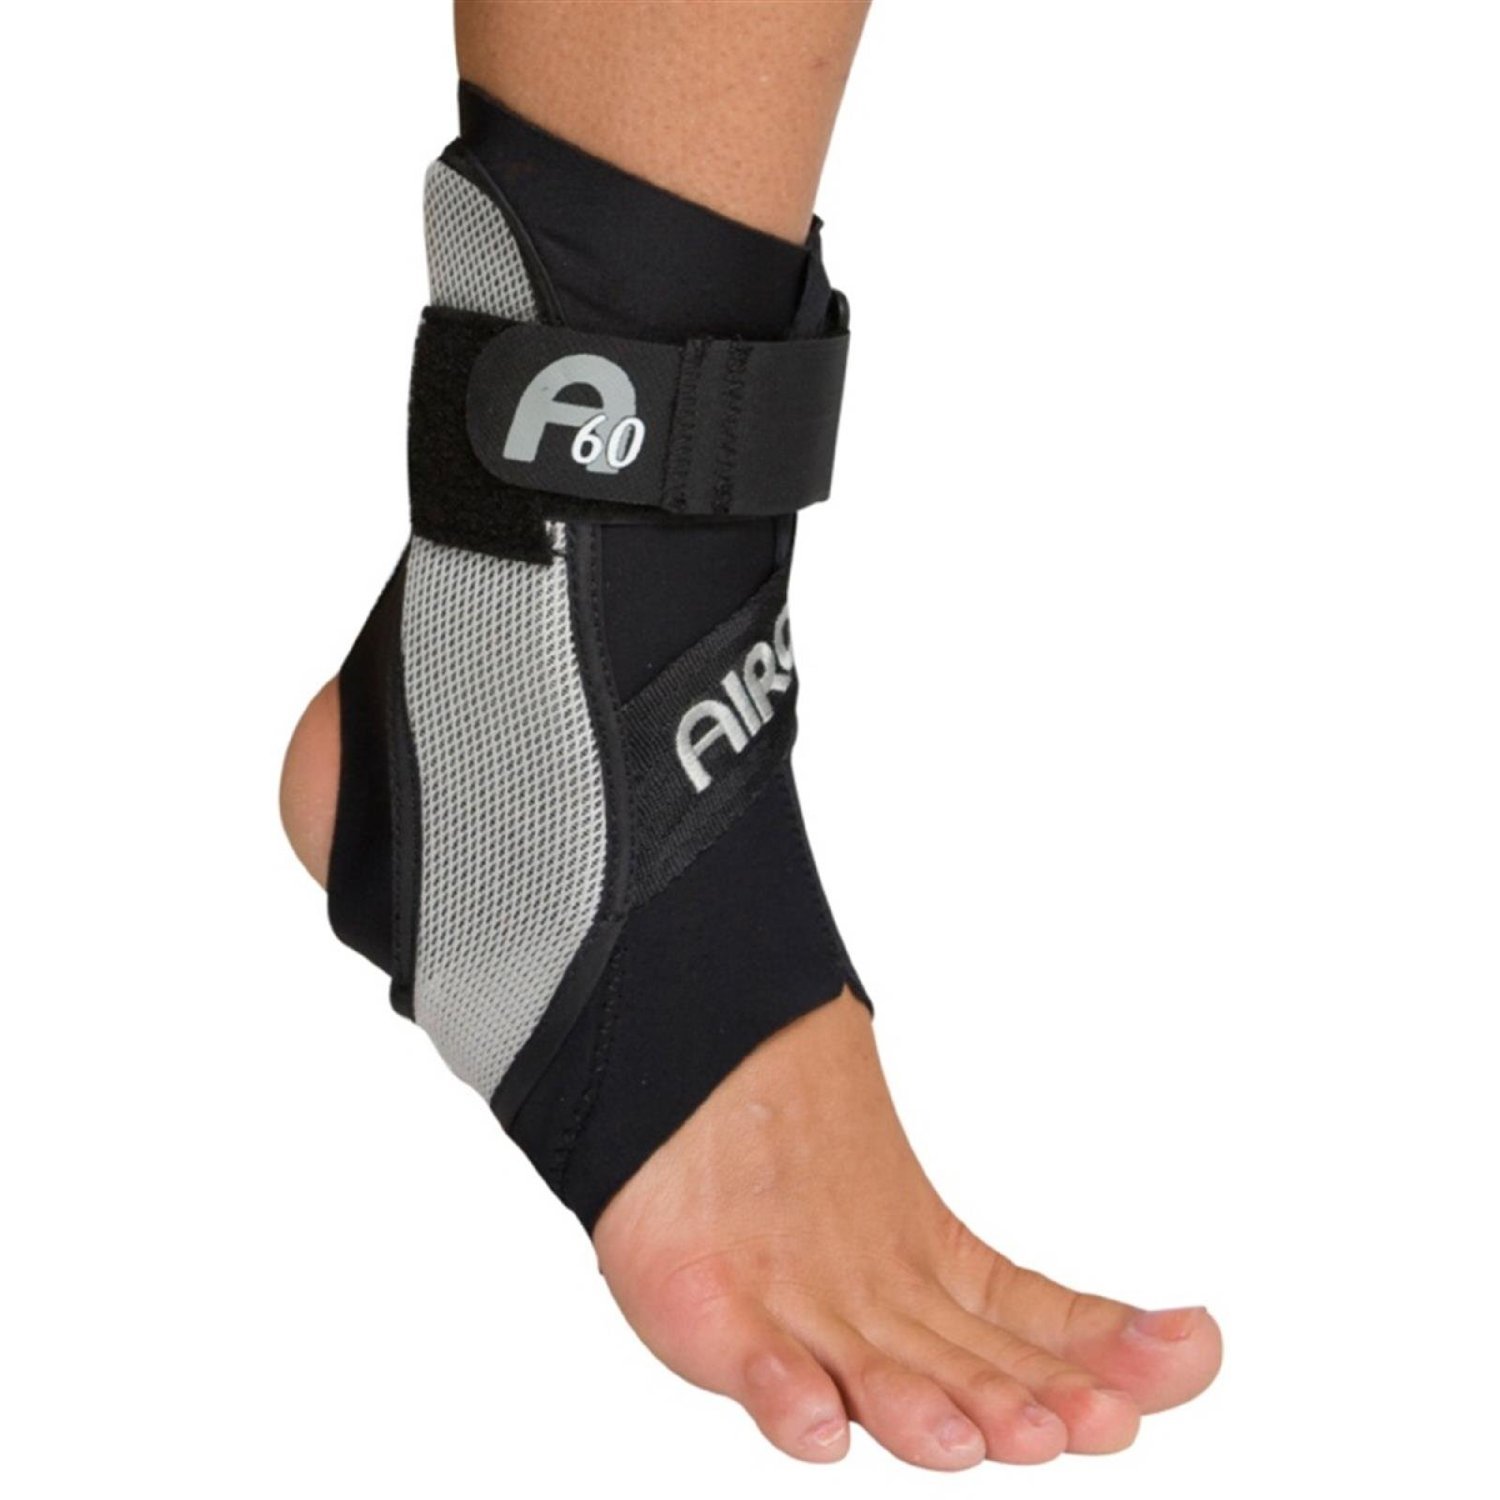 Aircast DJO Ankle Support Black, Grey Strap Closure Right Ankle Medium